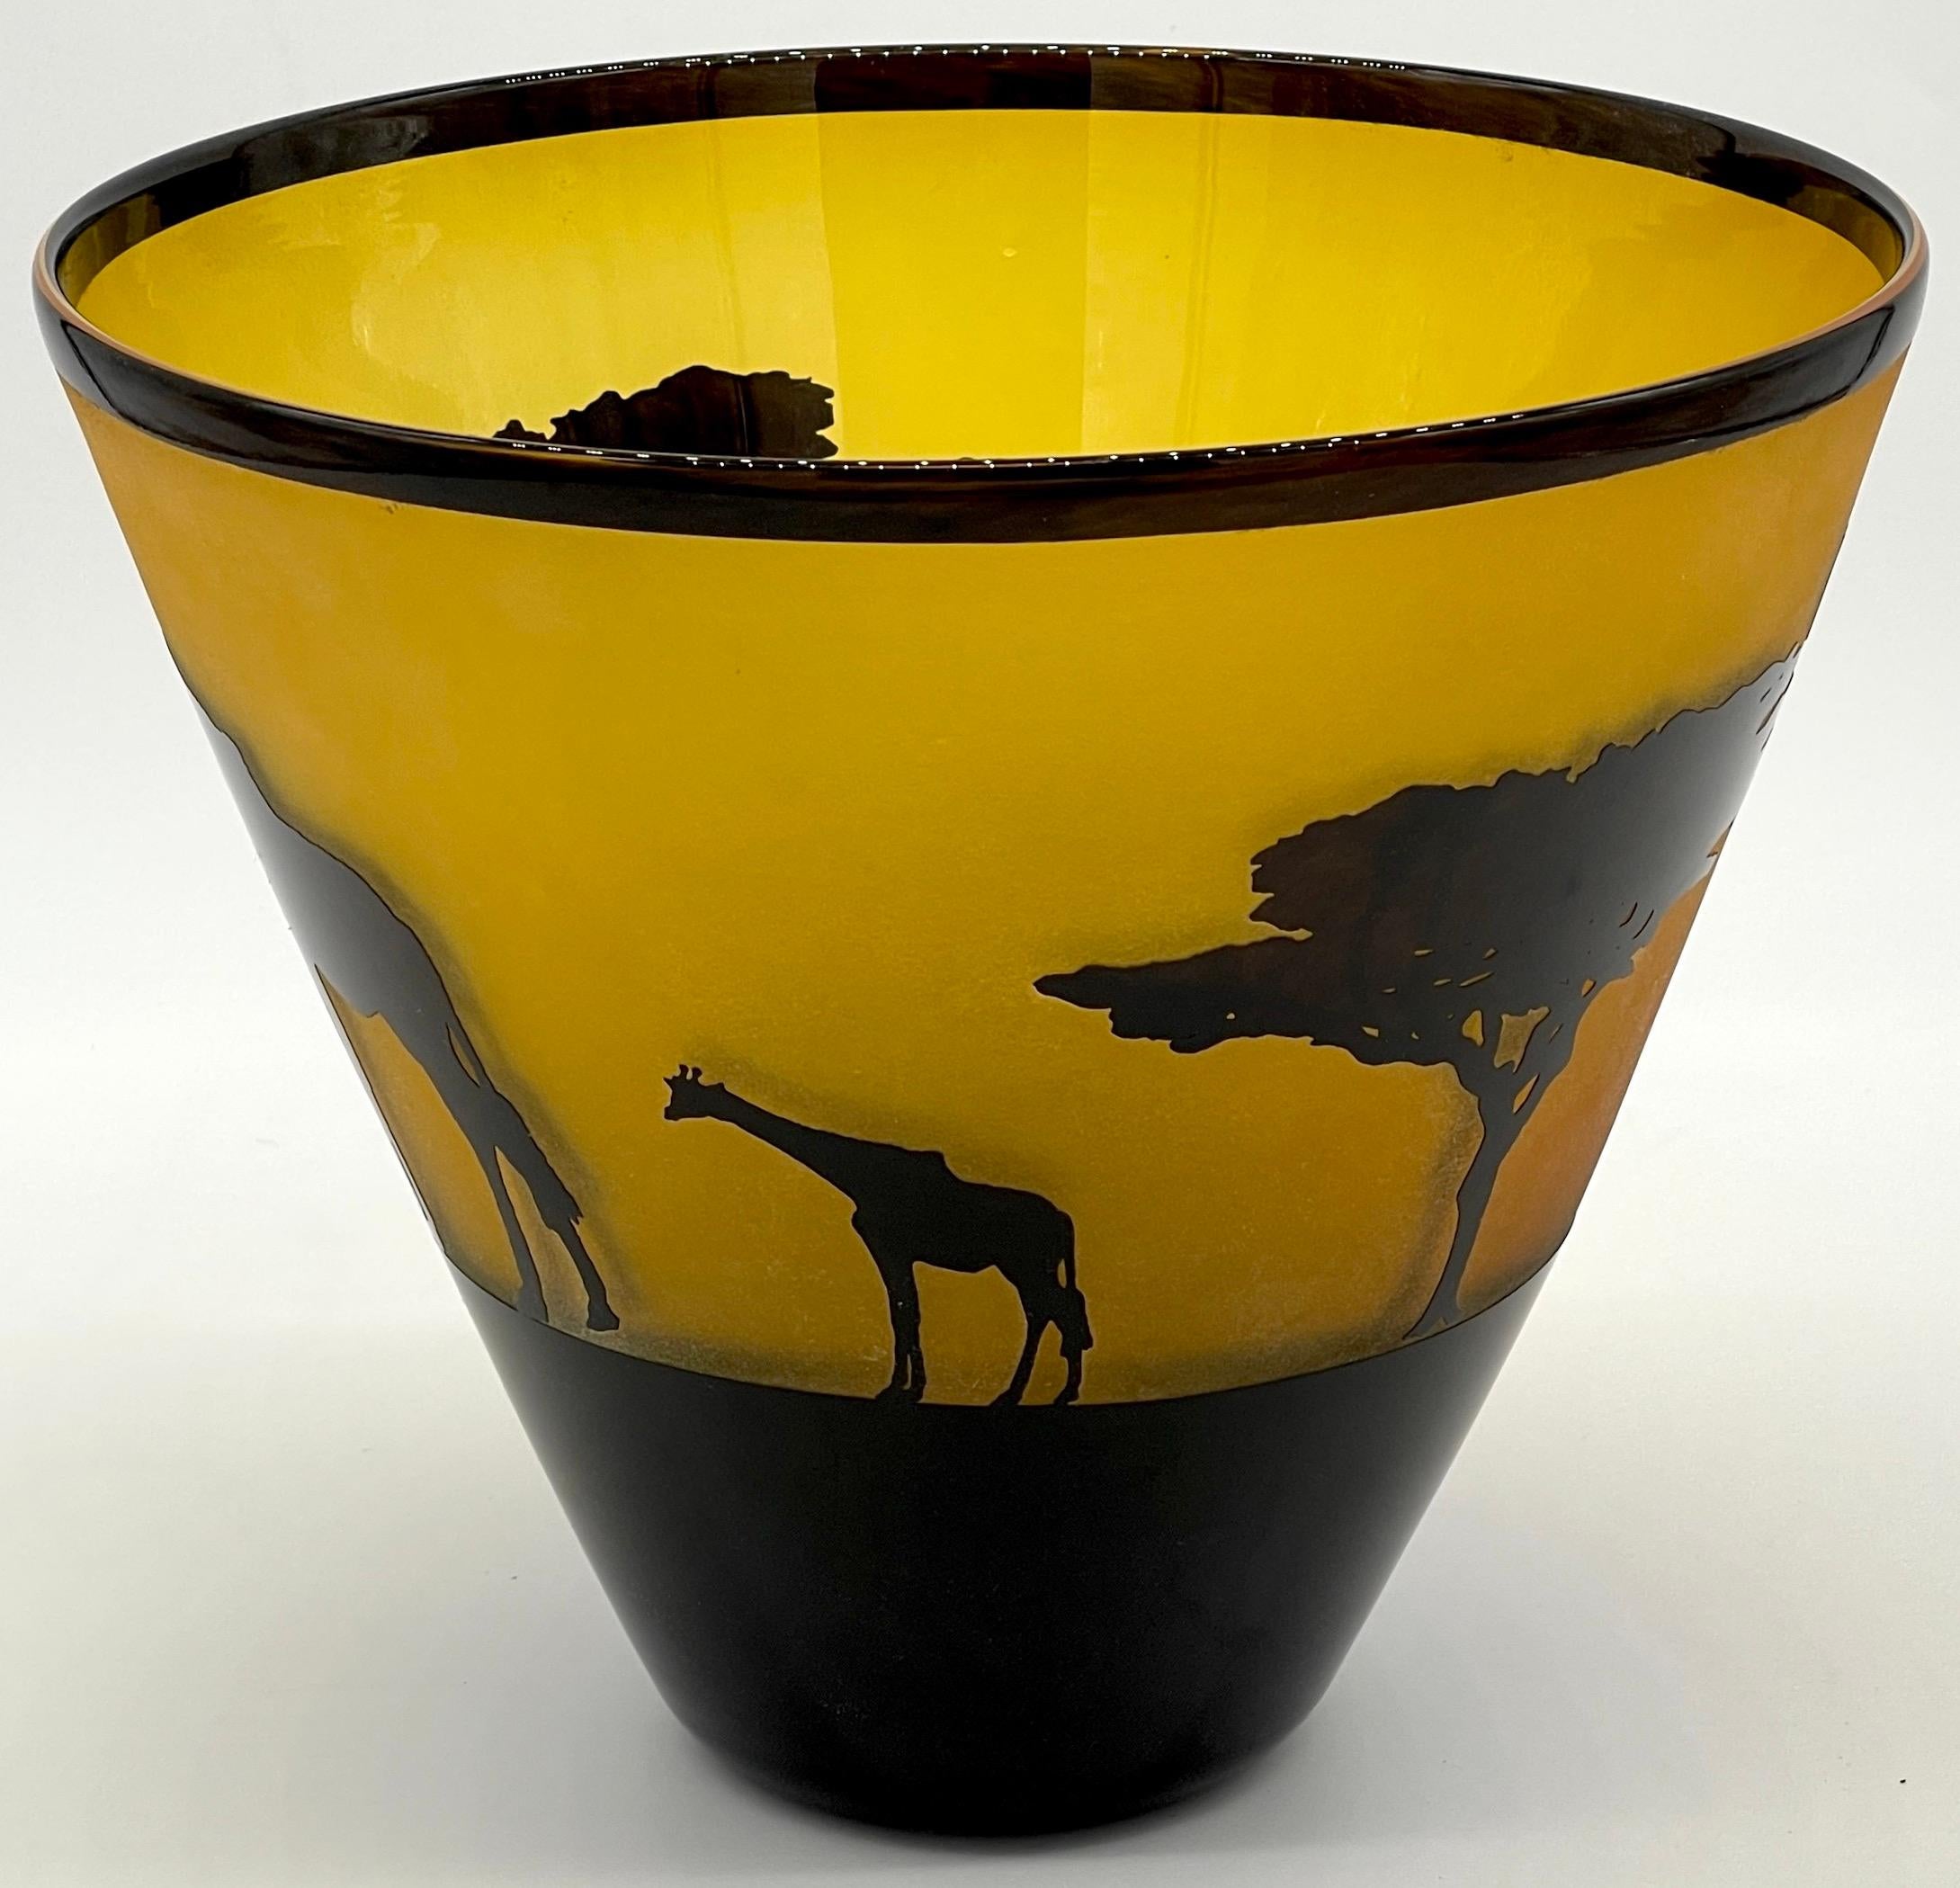 20th Century African Landscape Cameo Glass Vase by Steven Correia, 1986 Edition of #168/500